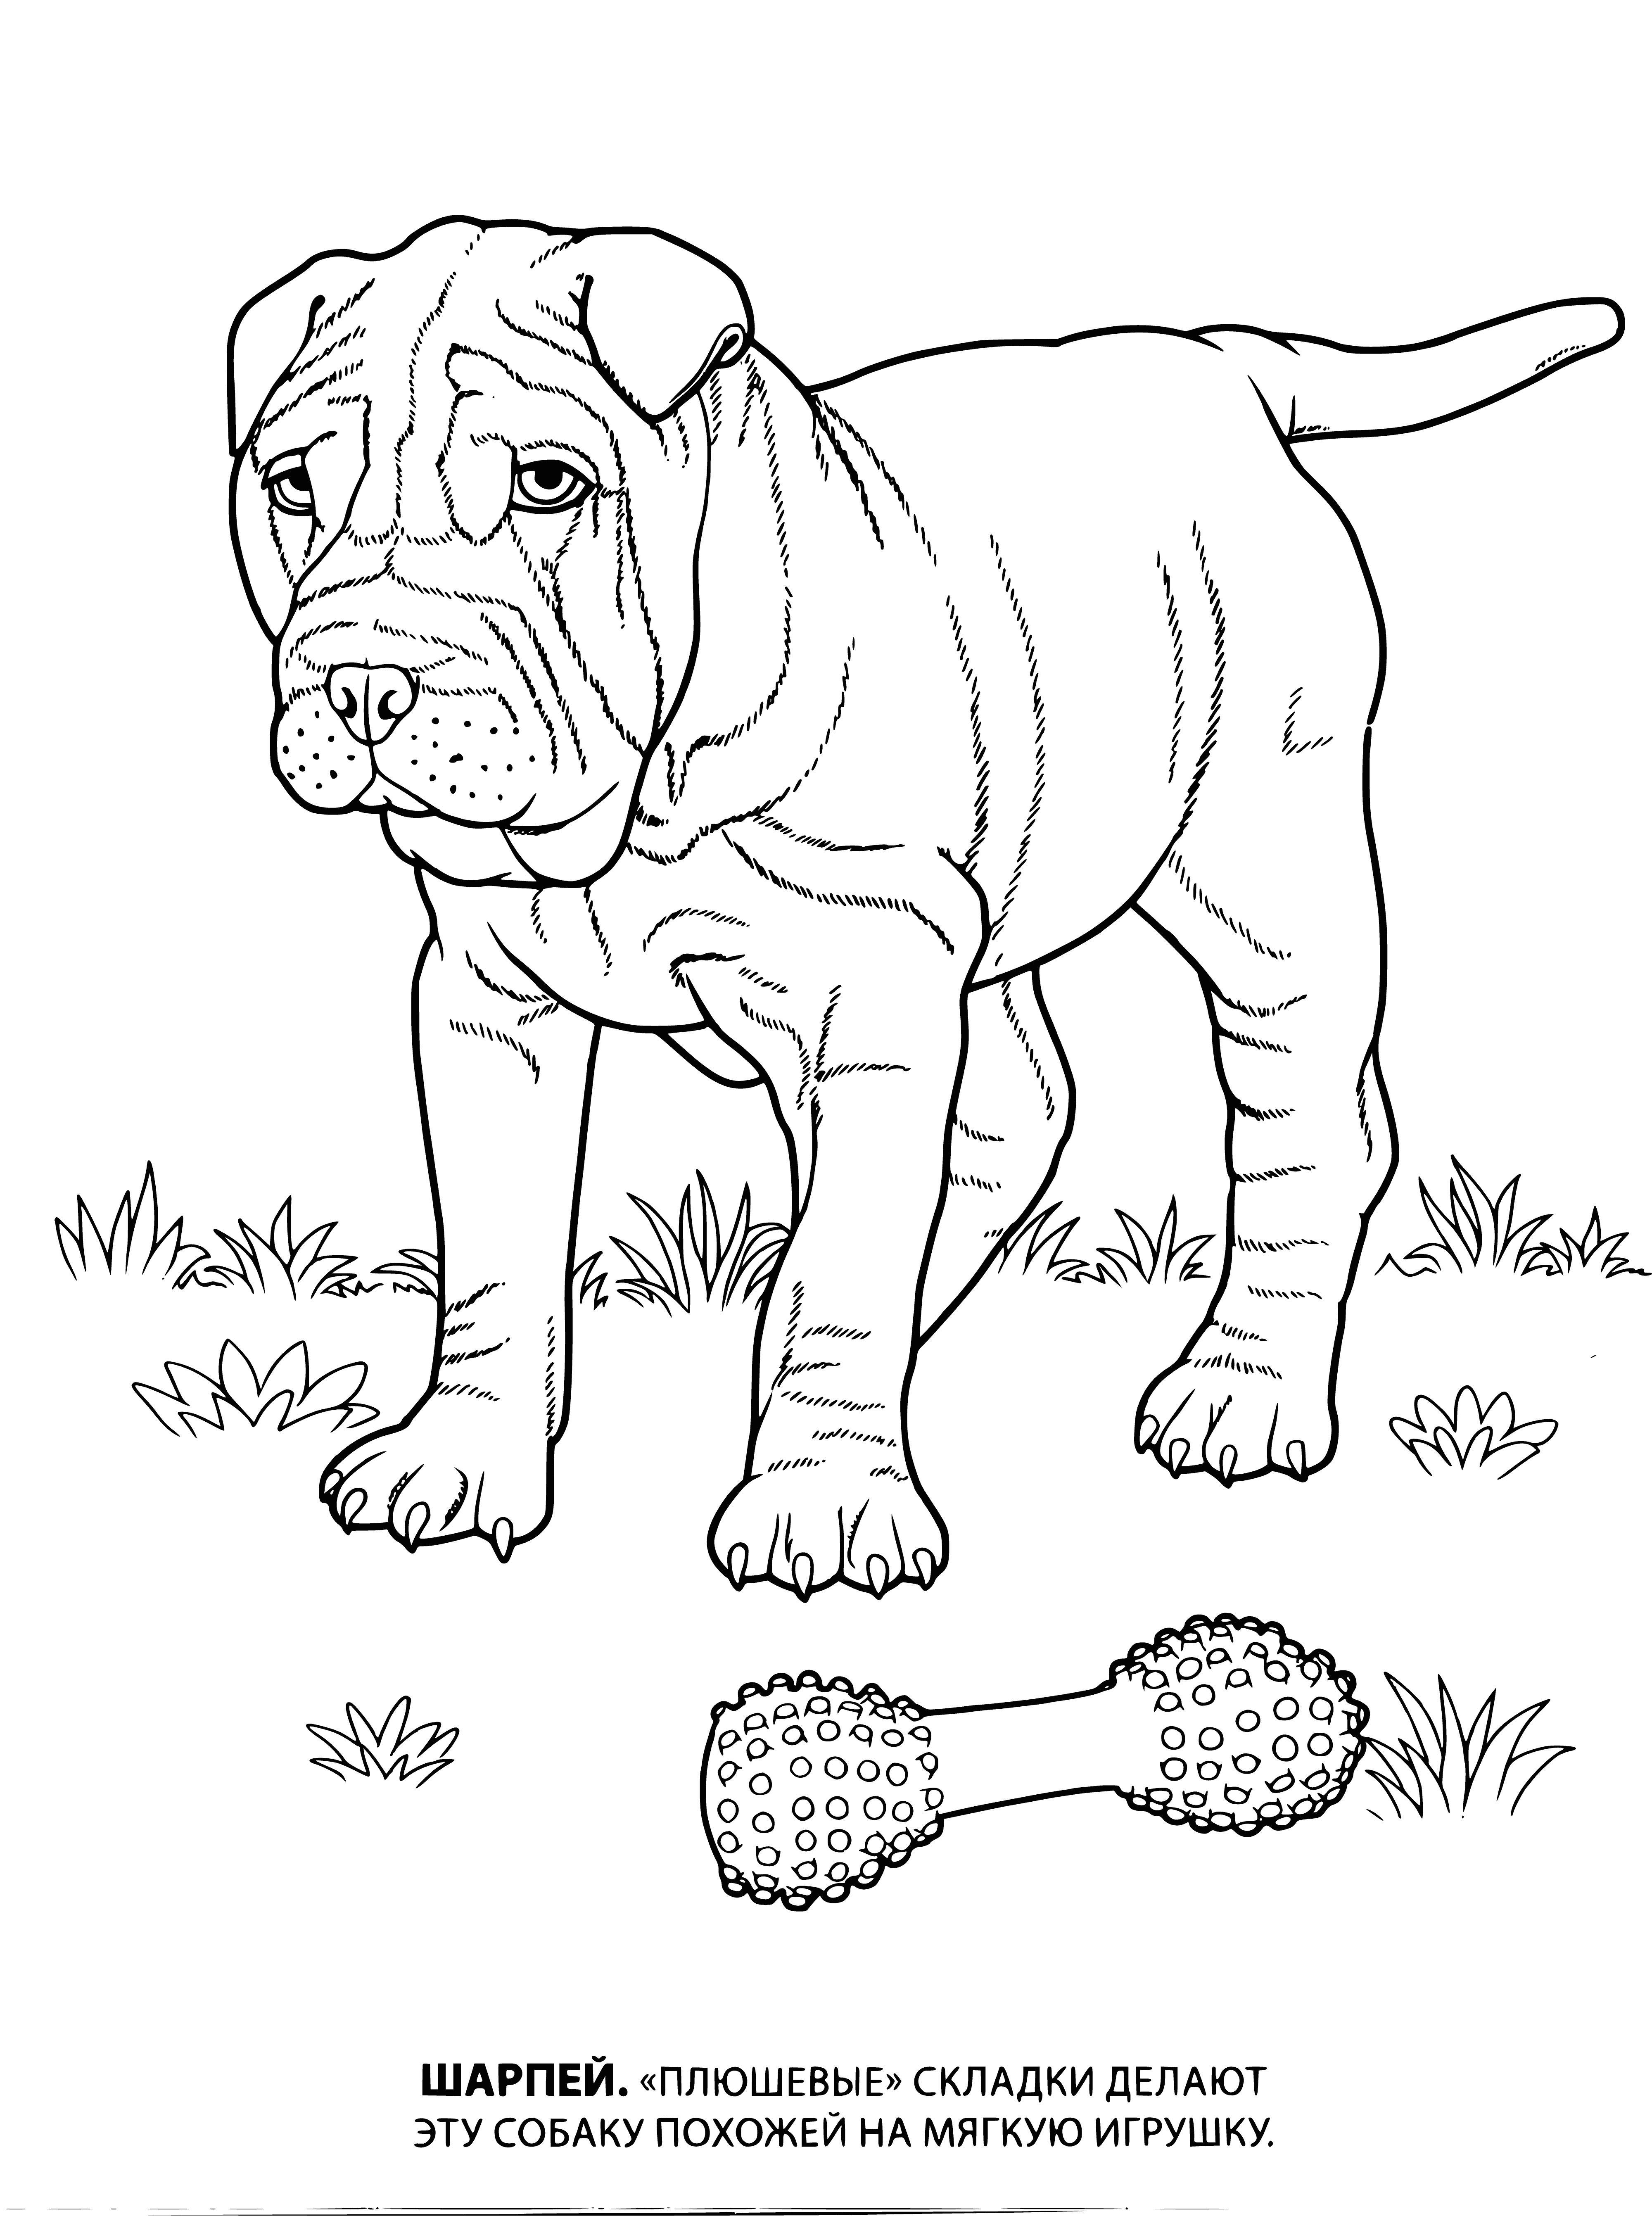 coloring page: Small, light brown dog stands on grass in front of picket fence. Tongue hanging out & tail wagging - perfect coloring page! #coloringpage